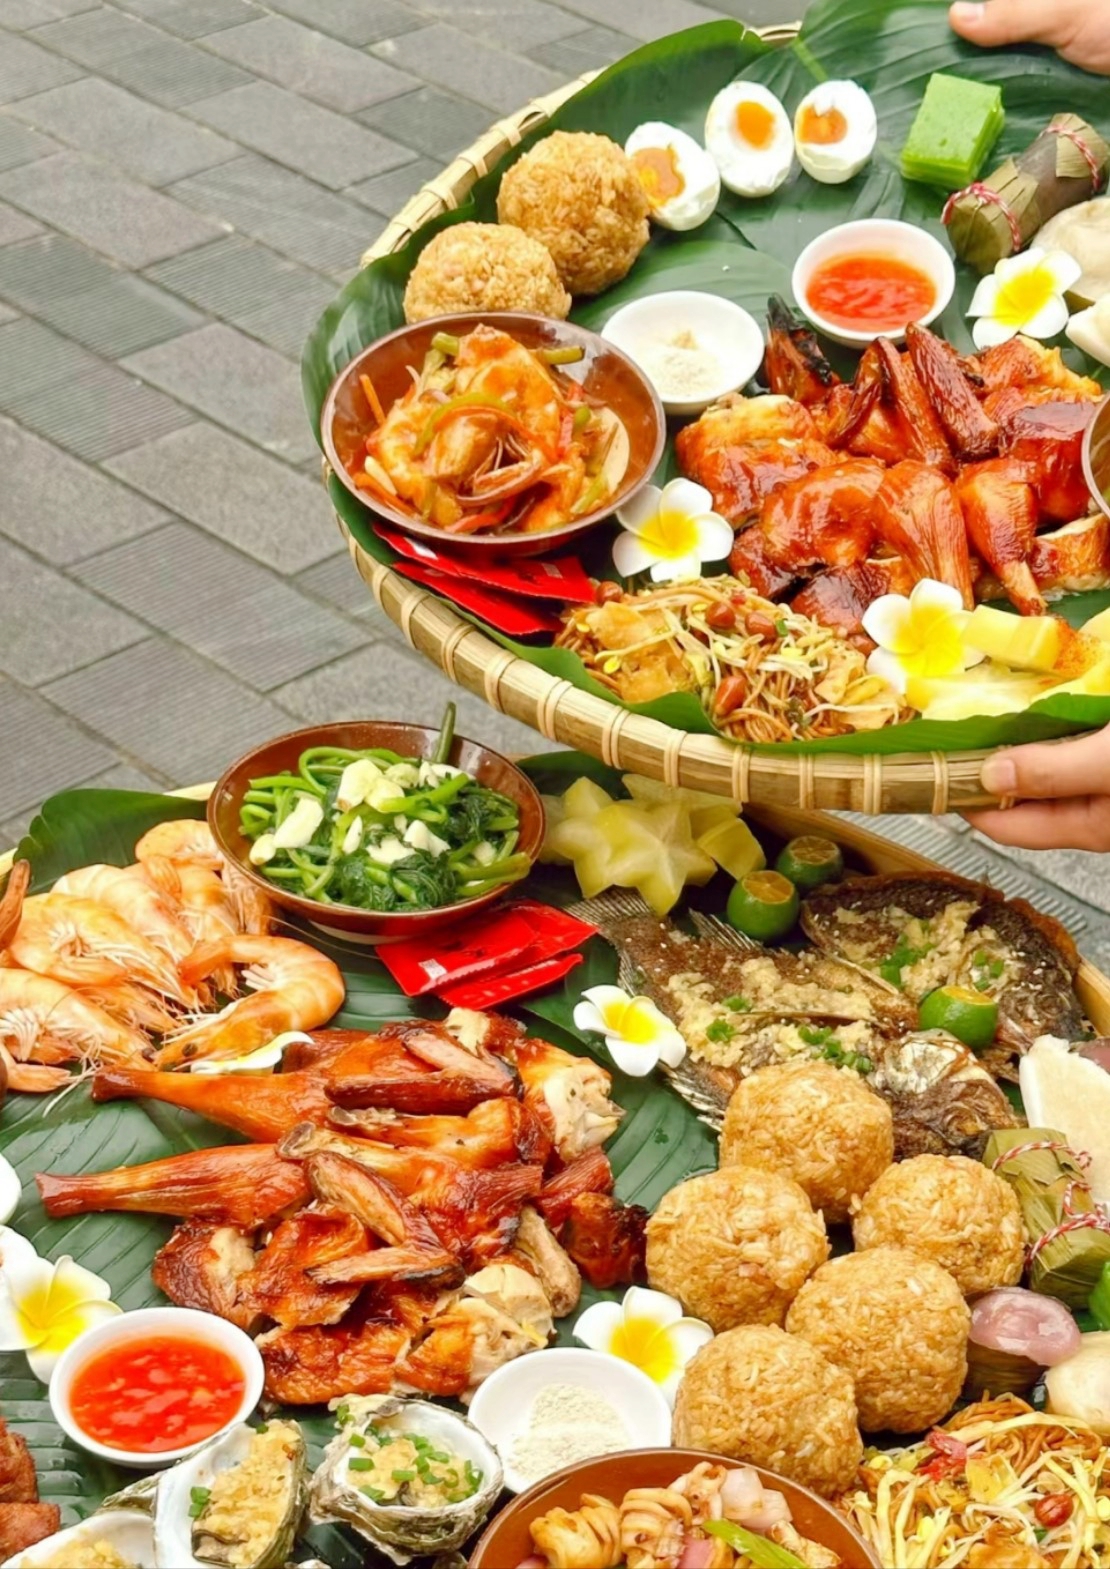 Boji Rice is to put different Hainan-style delicacies into a bamboo or wicker container, including coconut rice, roasted Wenchang chicken, braised pork feet, stir-fried seafood, sea duck eggs, and tropical fruits. /Photo provided to CGTN